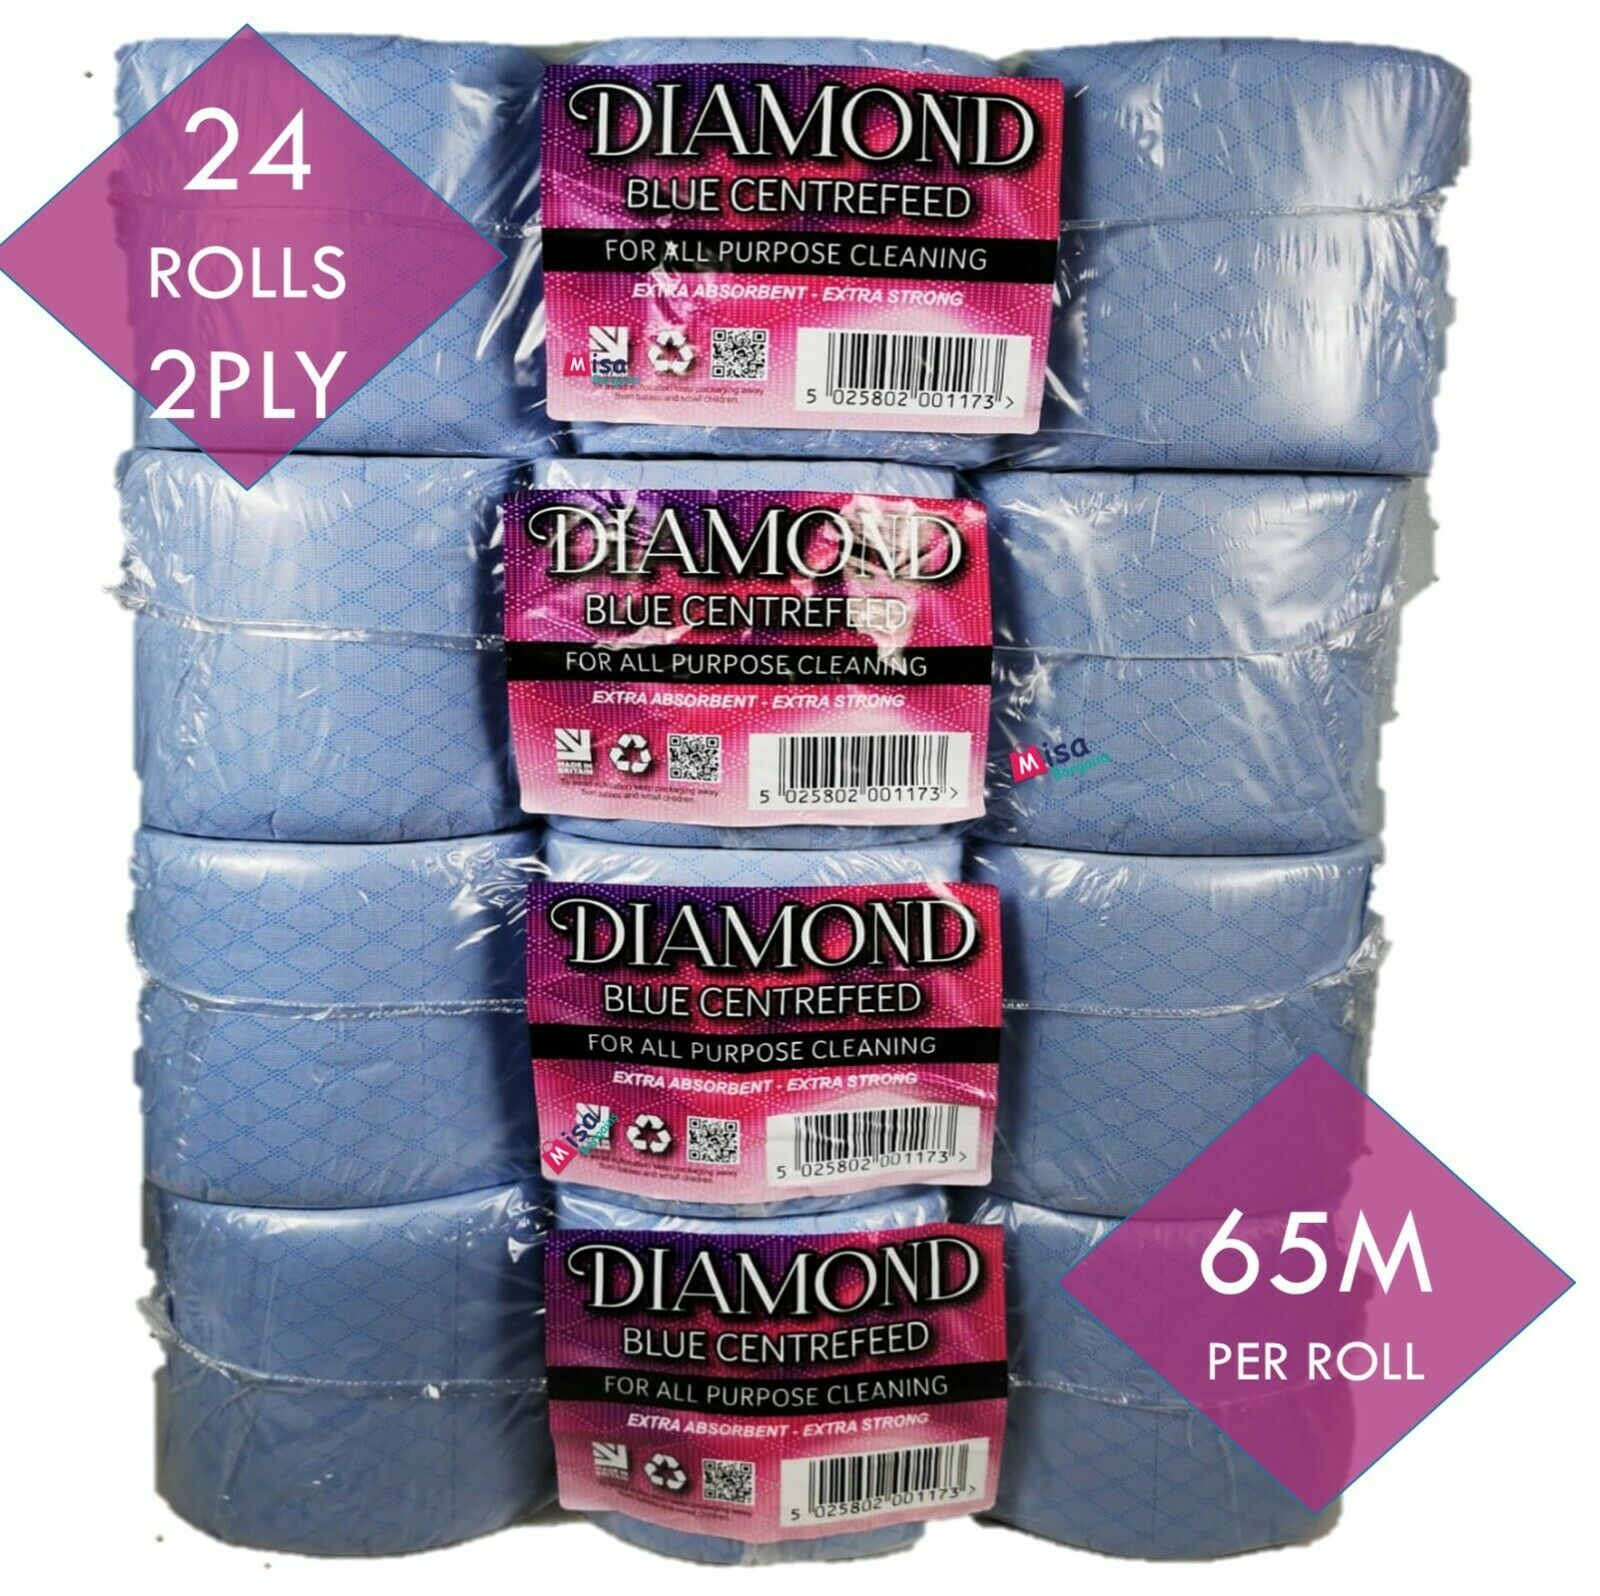 24 Rolls (4 PACKS) 65M Blue Centre feed Rolls Embossed 2ply Wiper Paper Towel